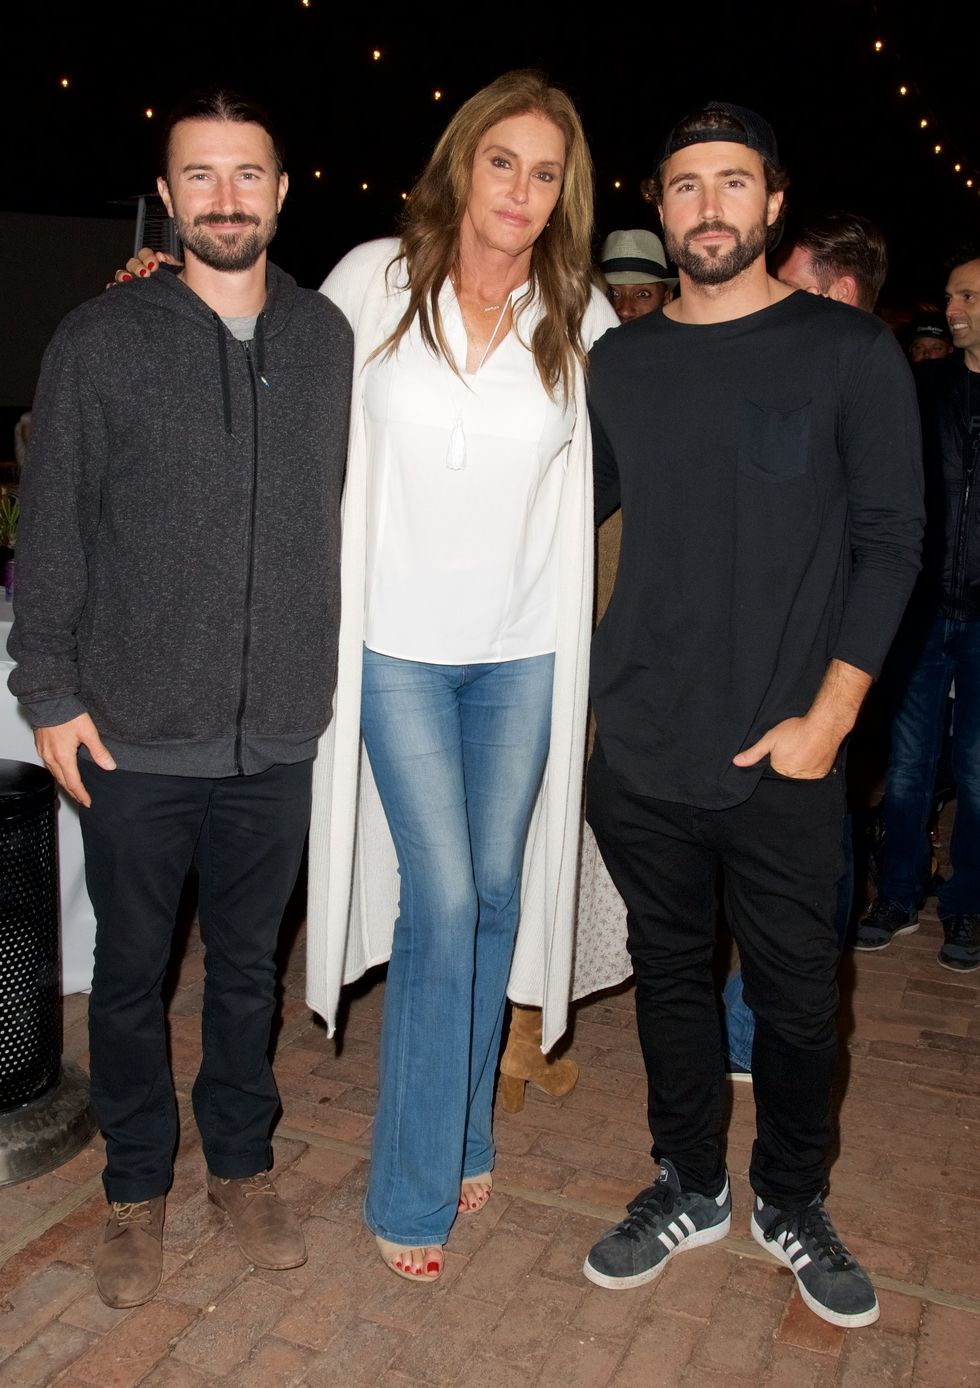 Brandon, Caitlyn and Brody Jenner